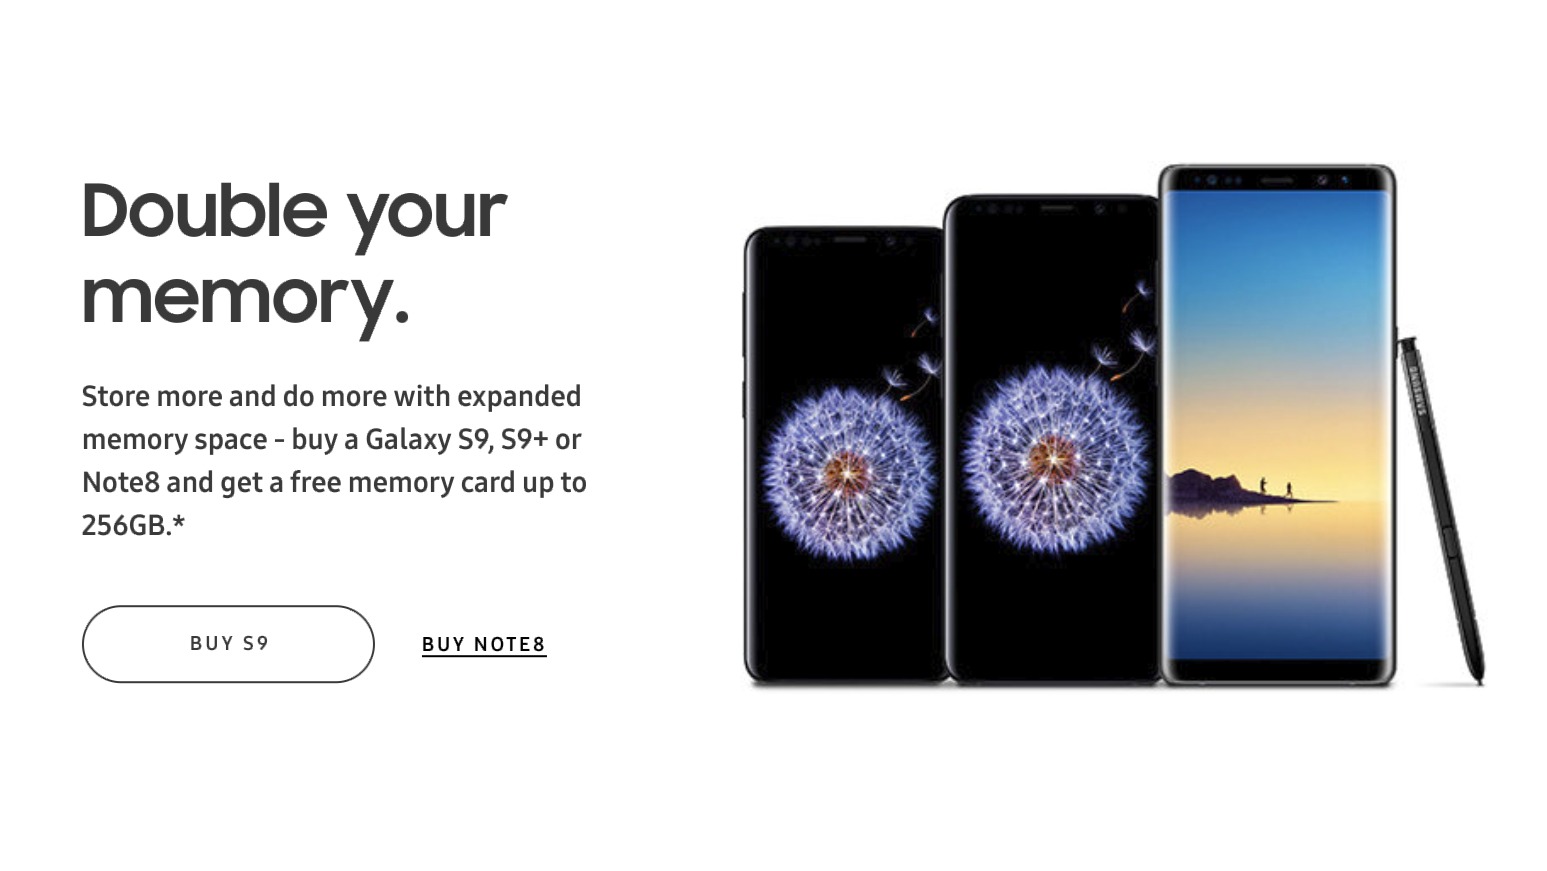 Samsung Galaxy S9, S9 Plus, Note 8 free microSD card offer